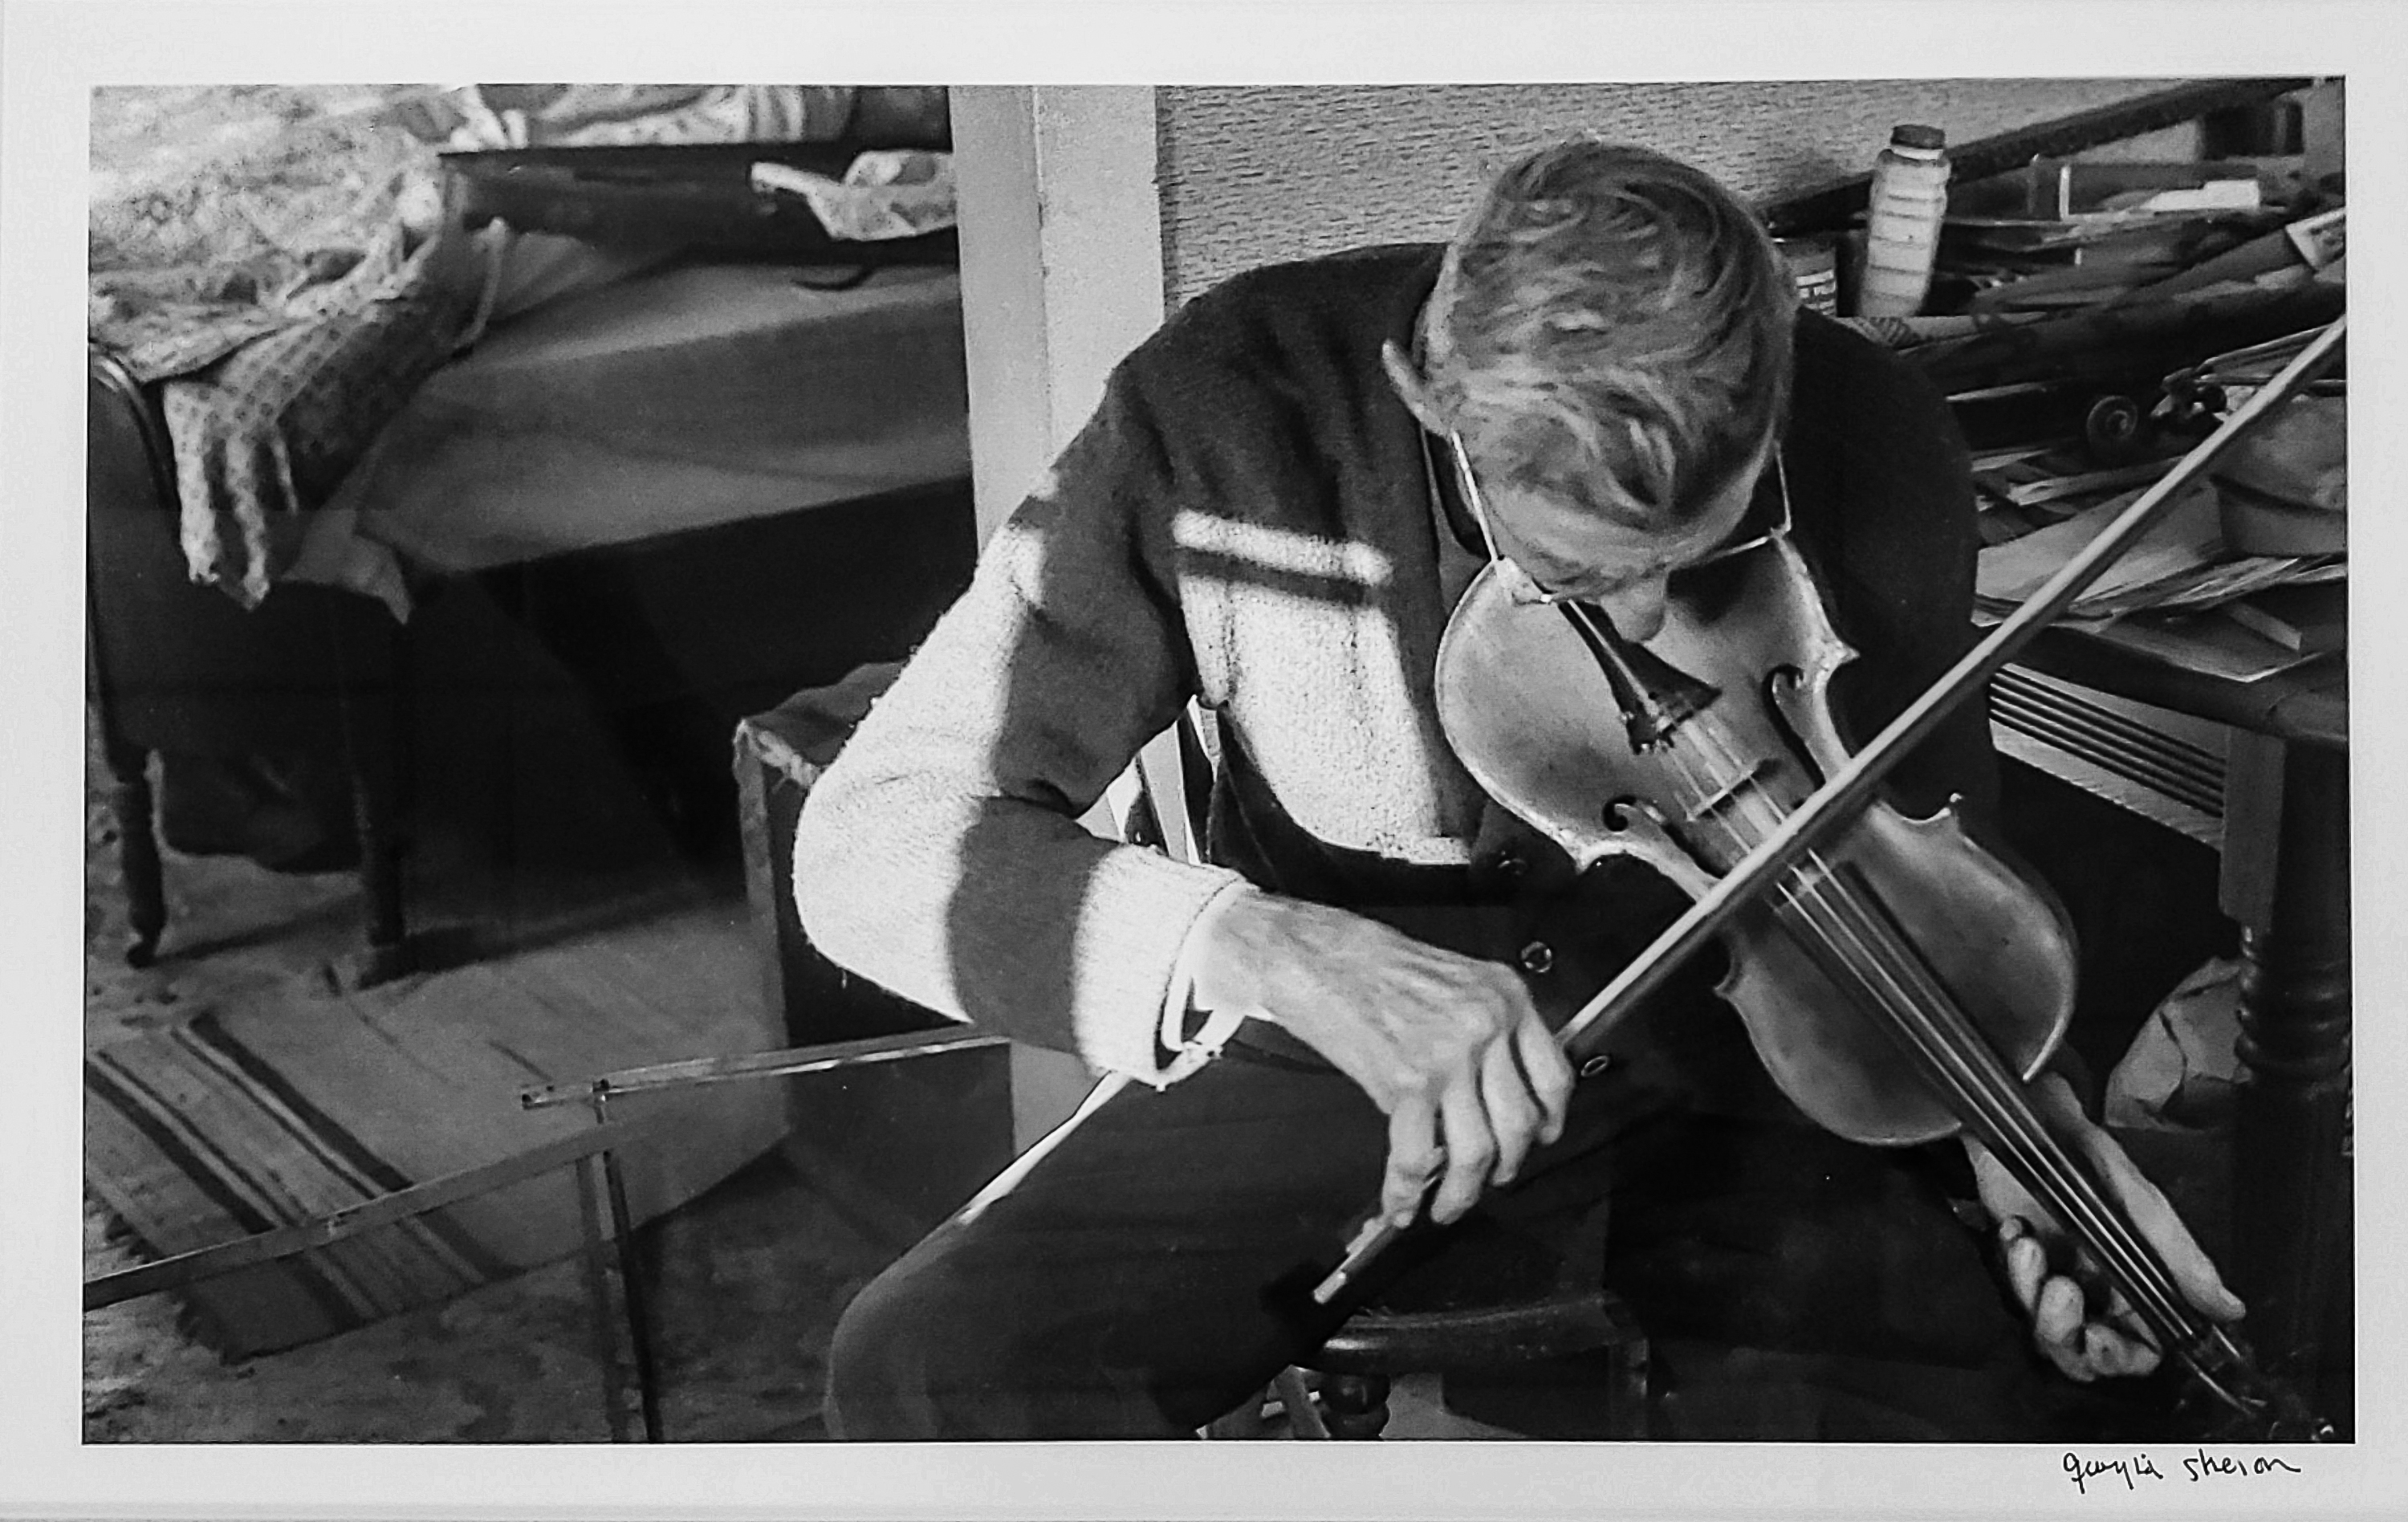 Image of a man playing a violin